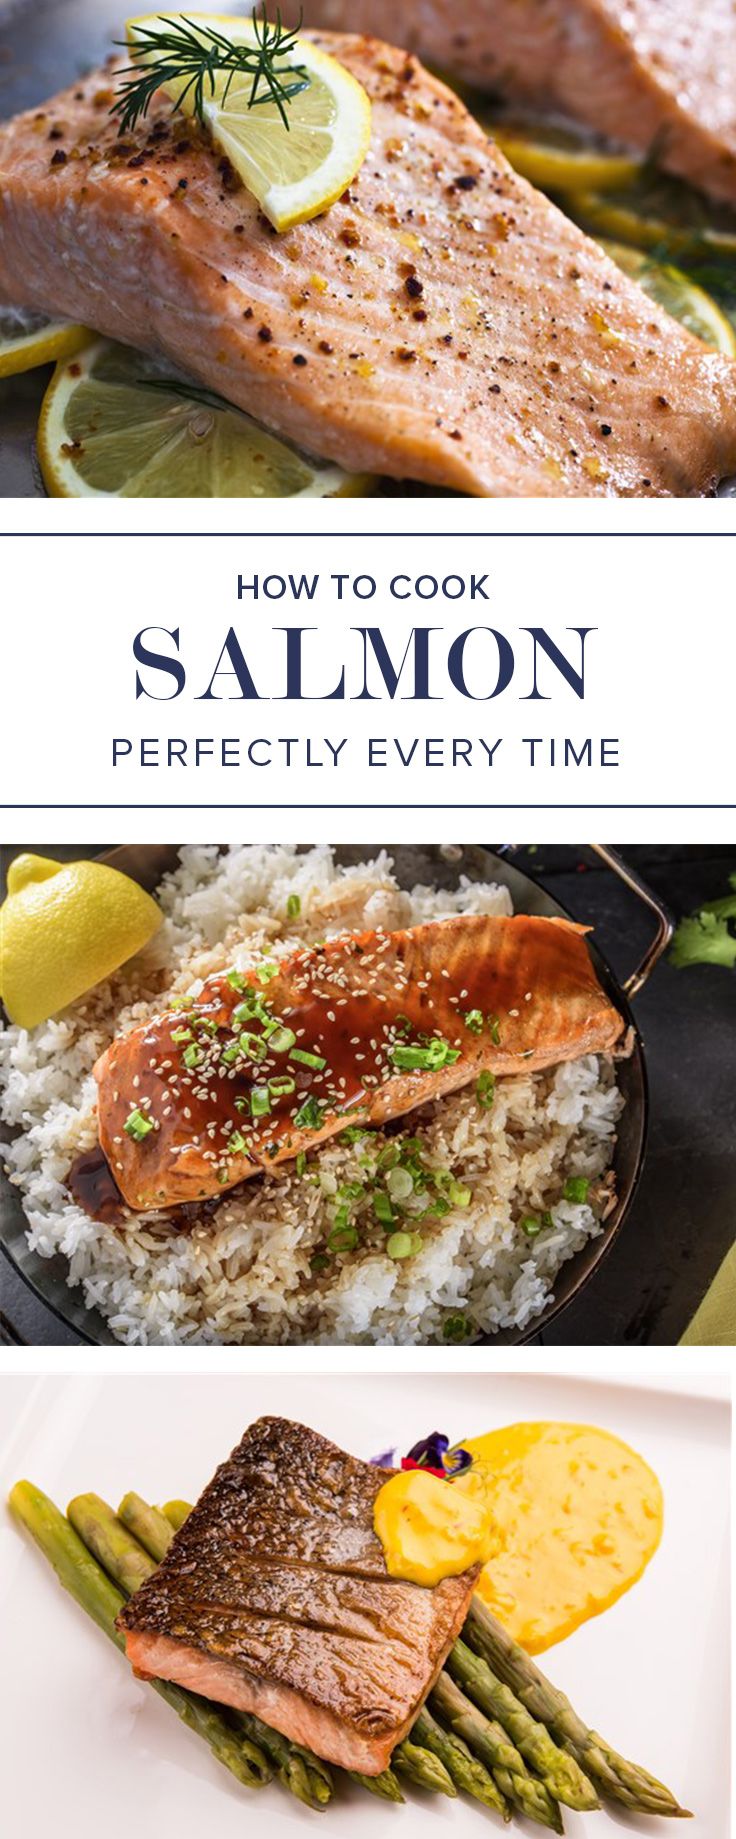 How Long To Cook Salmon At 400